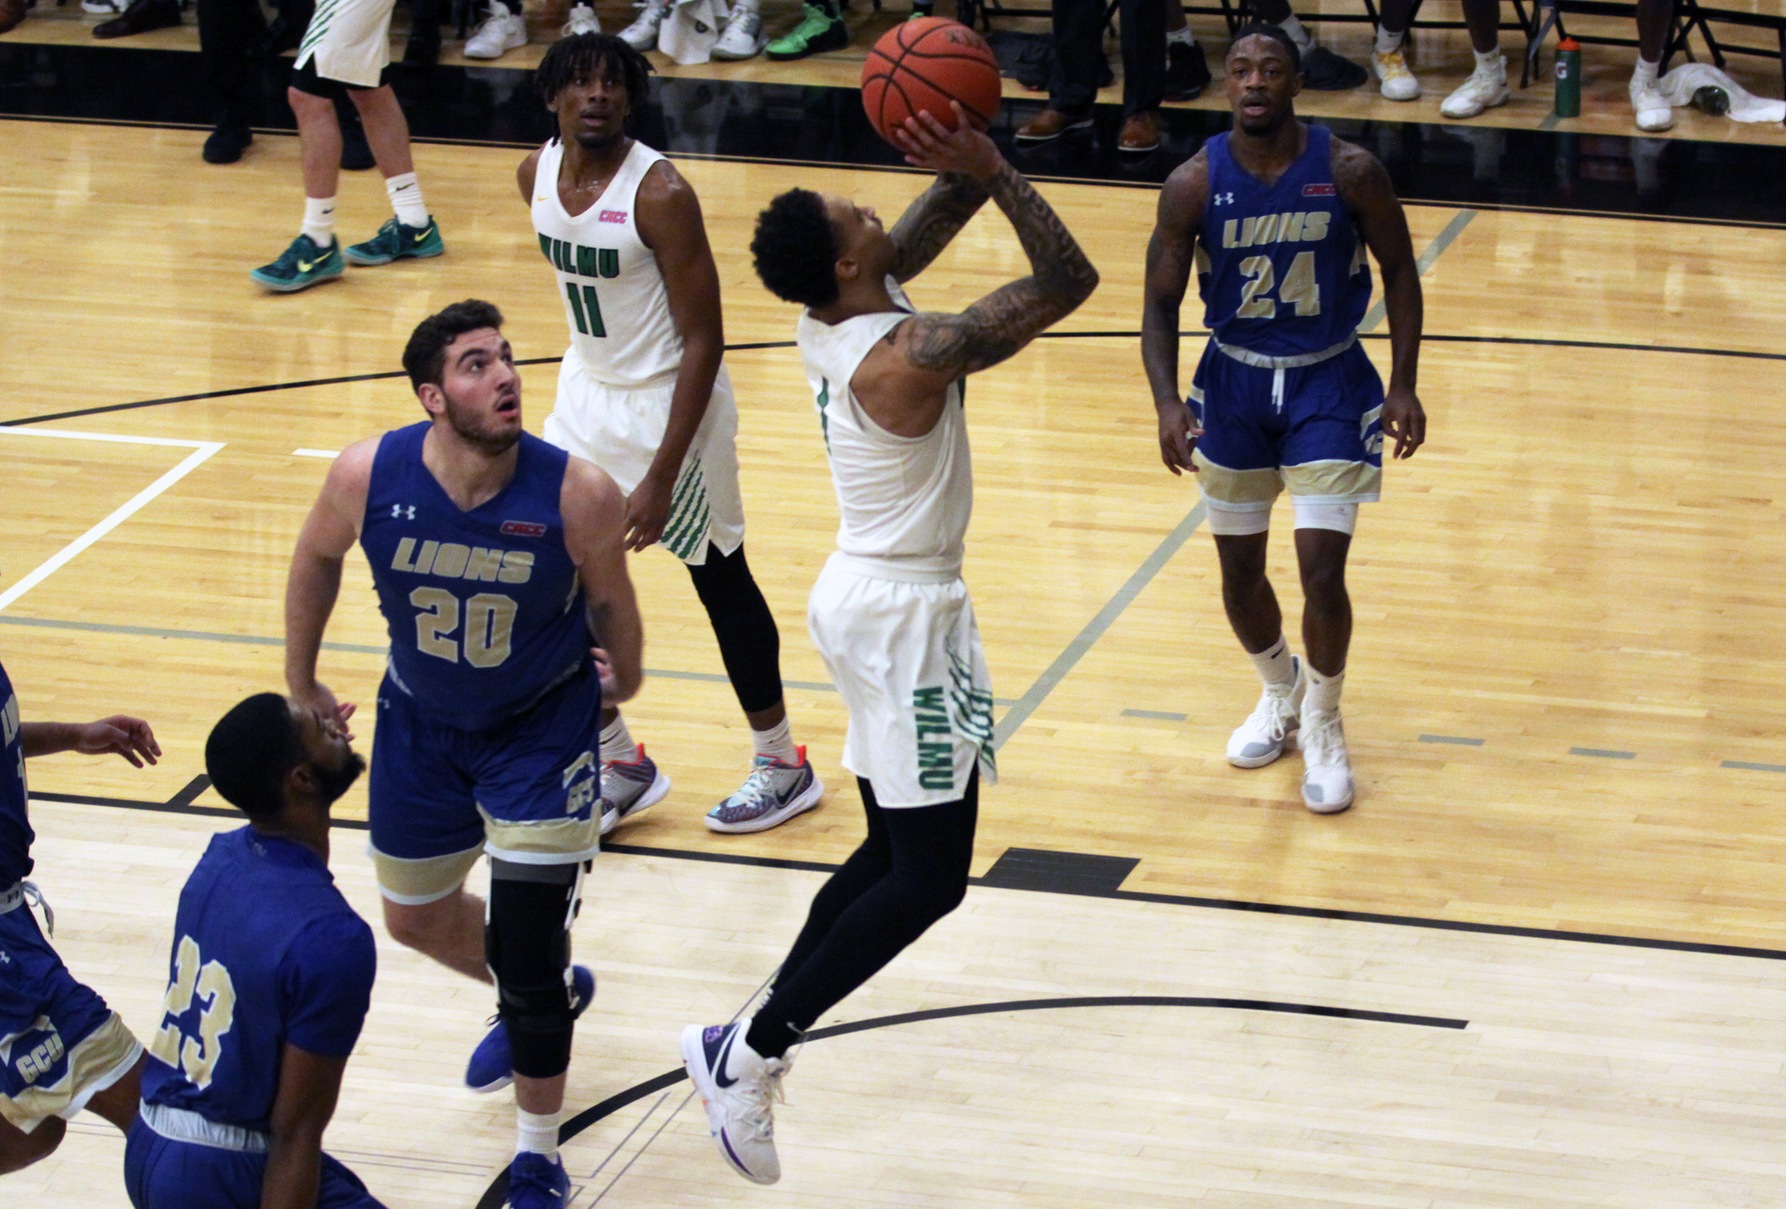 Photo of Jermaine Head who led the Wildcats with 32 points while adding six rebounds and six assists. Copyright 2020; Wilmington University. All rights reserved. Photo by Dan Lauletta. January 8, 2020 vs. Georgian Court.